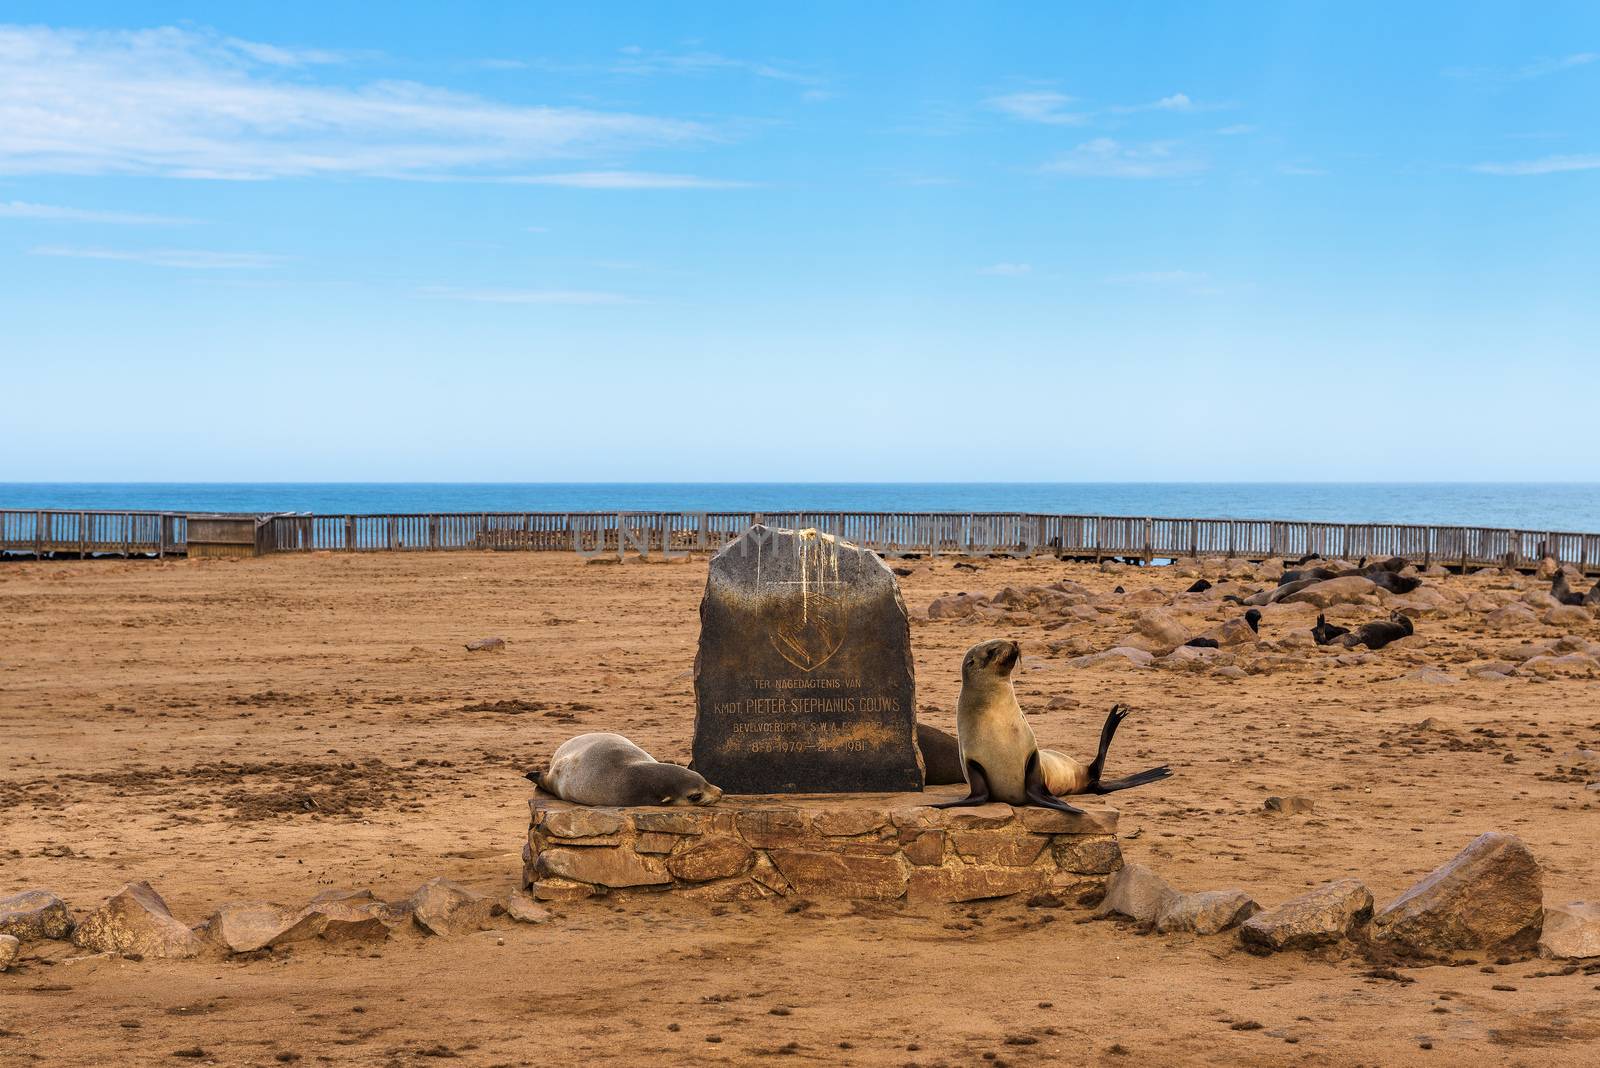 Cape Cross, Namibia - March 30, 2019 : Seals at the Cape Cross Seal Reserve in Namibia and its entry sign with text In memory of kmdt. Pieter Stephanus Gouws.